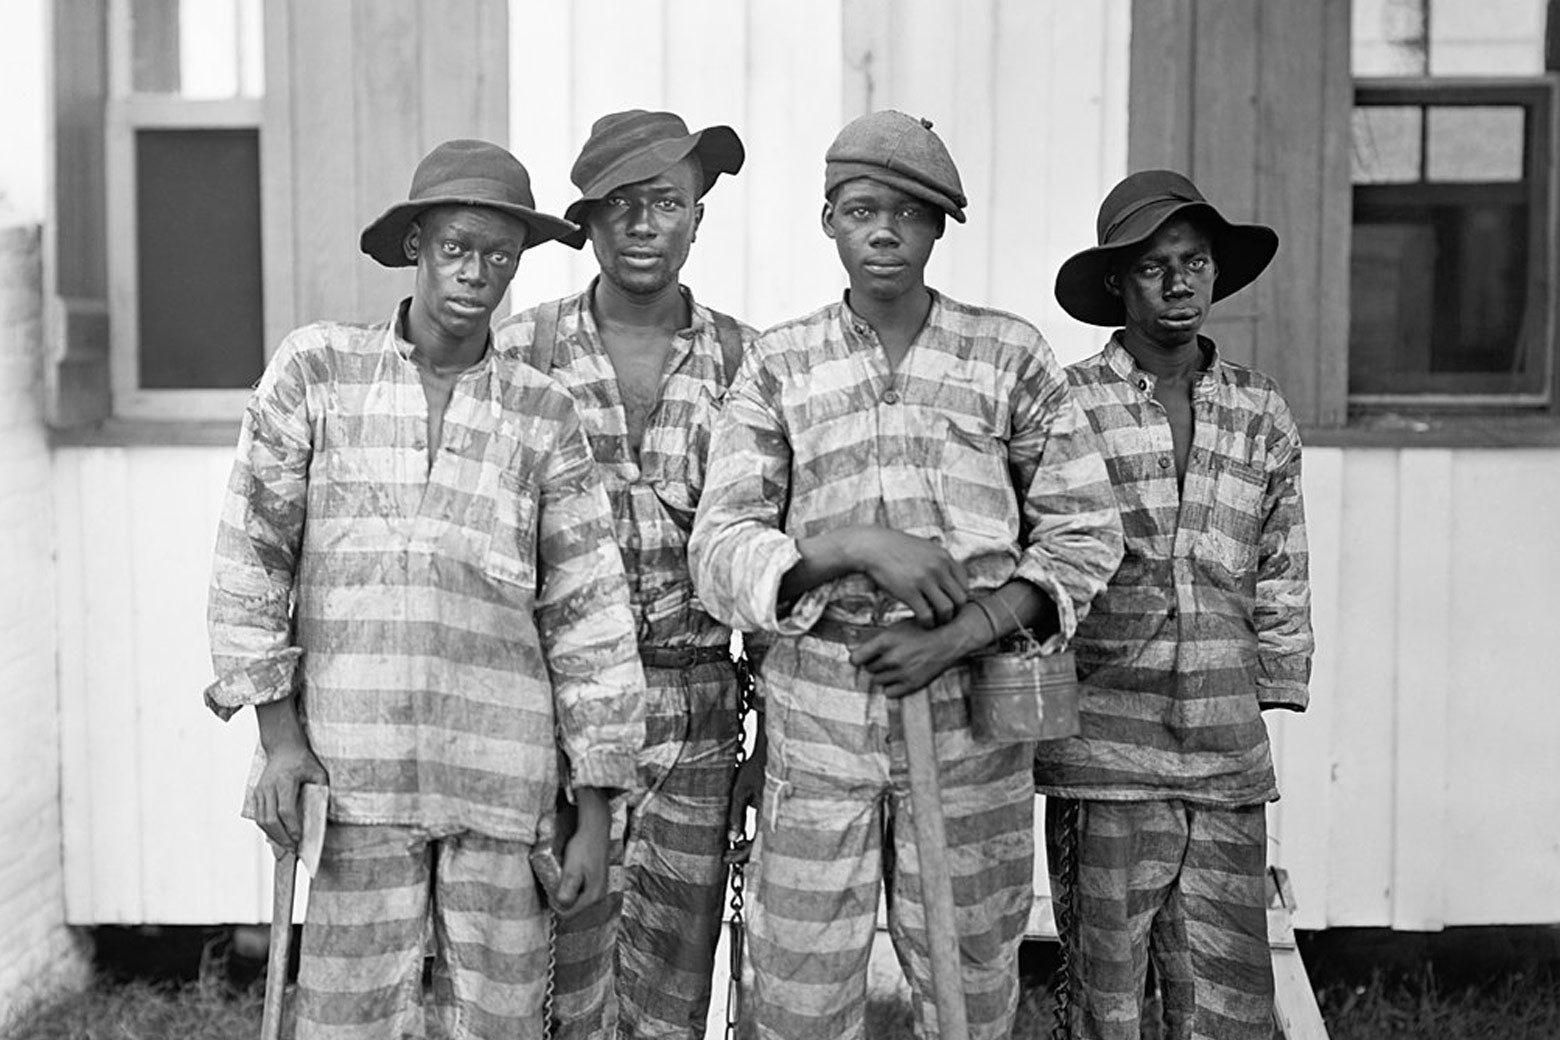 A Southern chain gang between from the 1900s